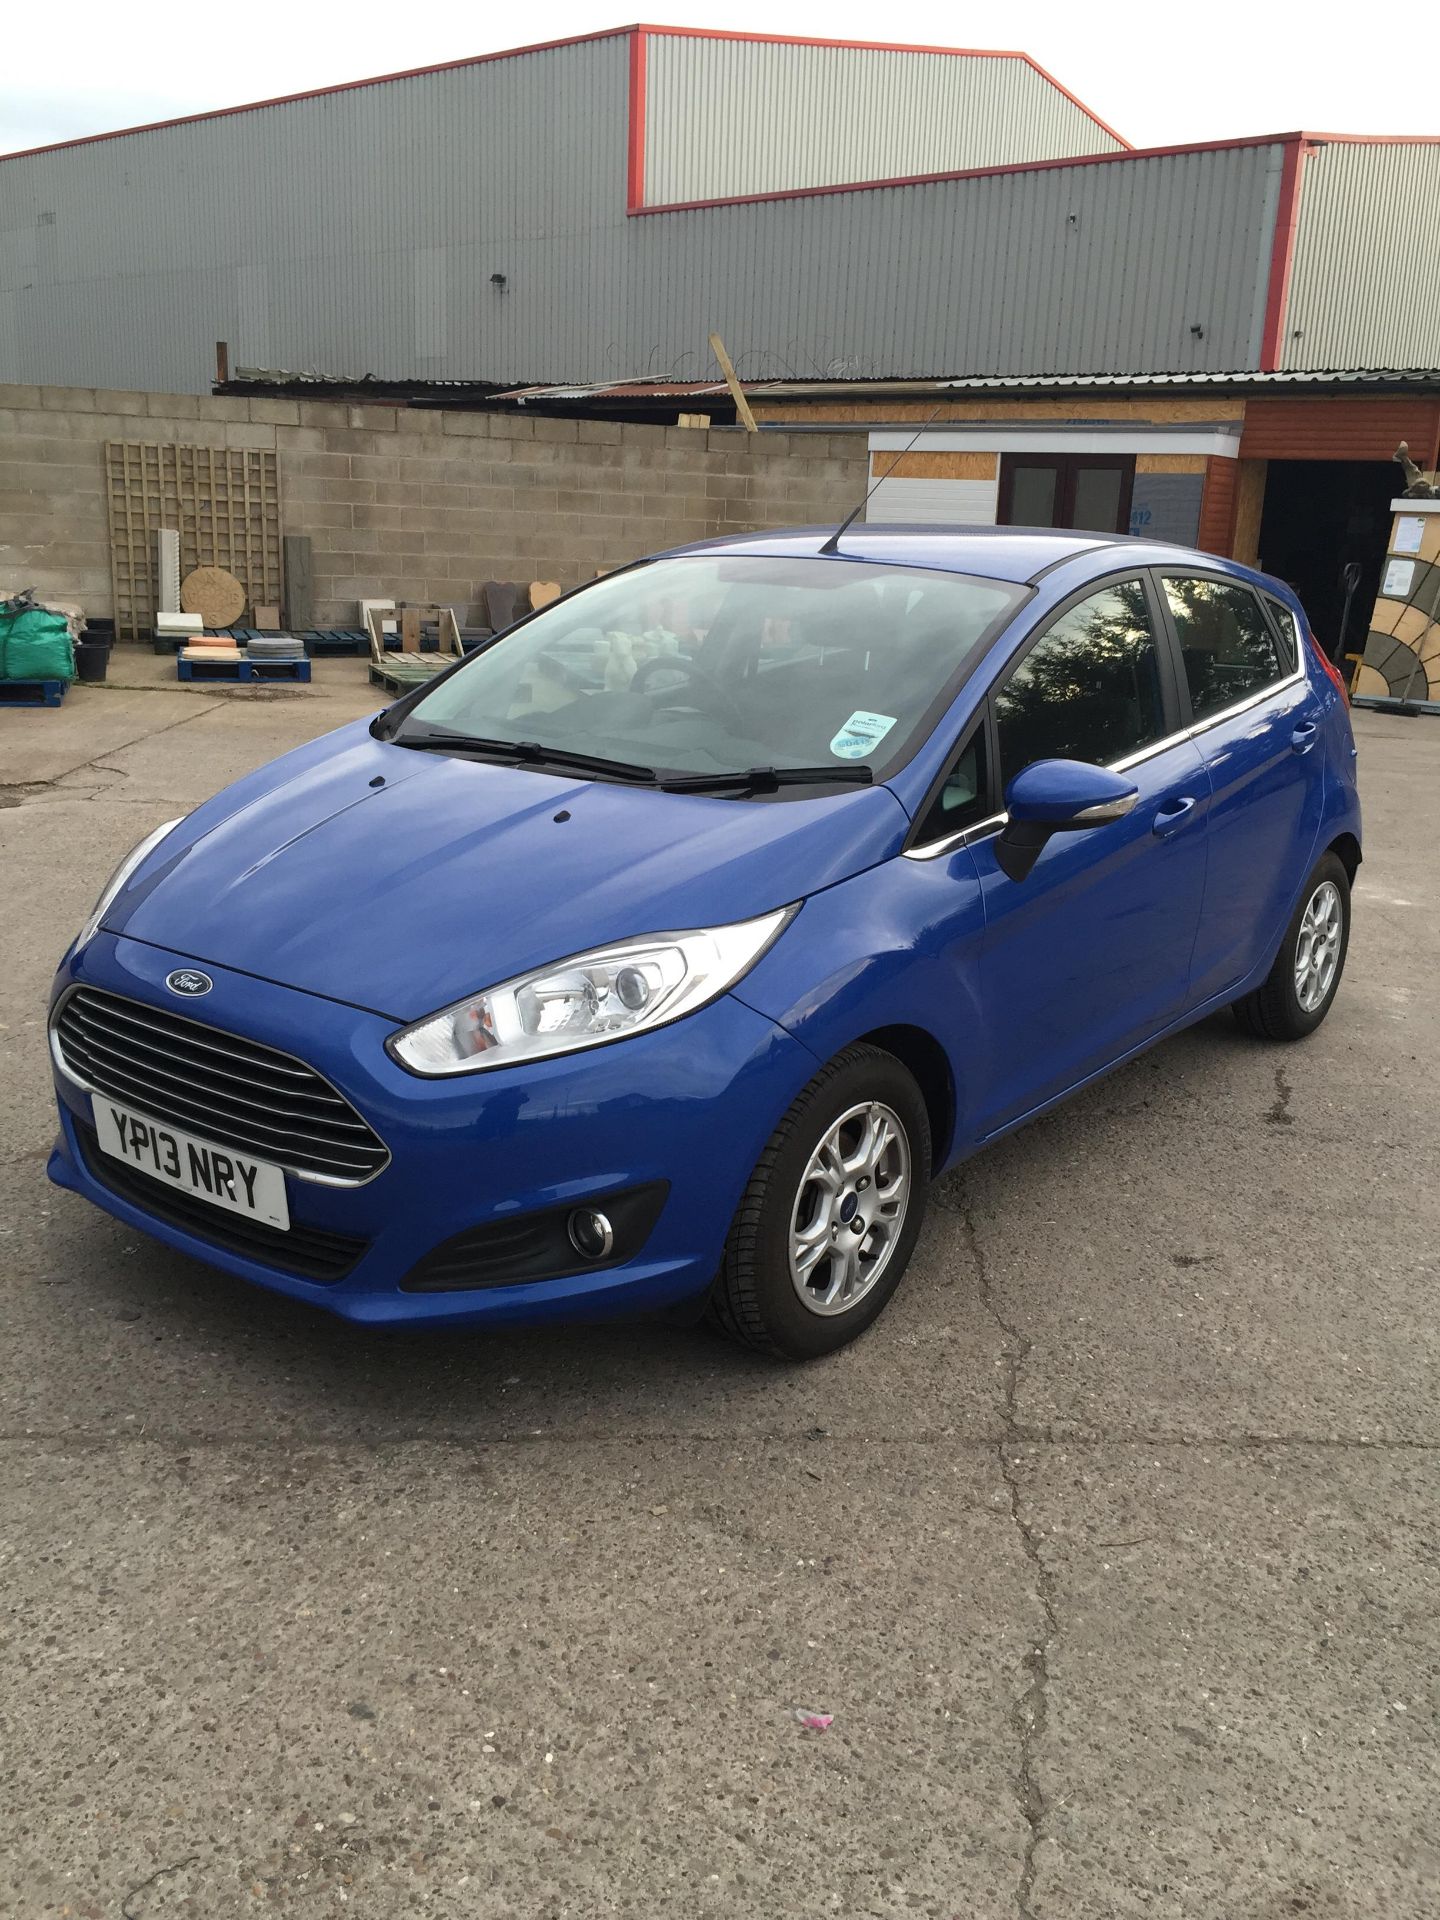 13 Plate FORD FIESTA ZETEC Econetic TDCI - YP13 NRY - Blue - 5 door hatchback - Tax expired 1st Feb - Image 15 of 17